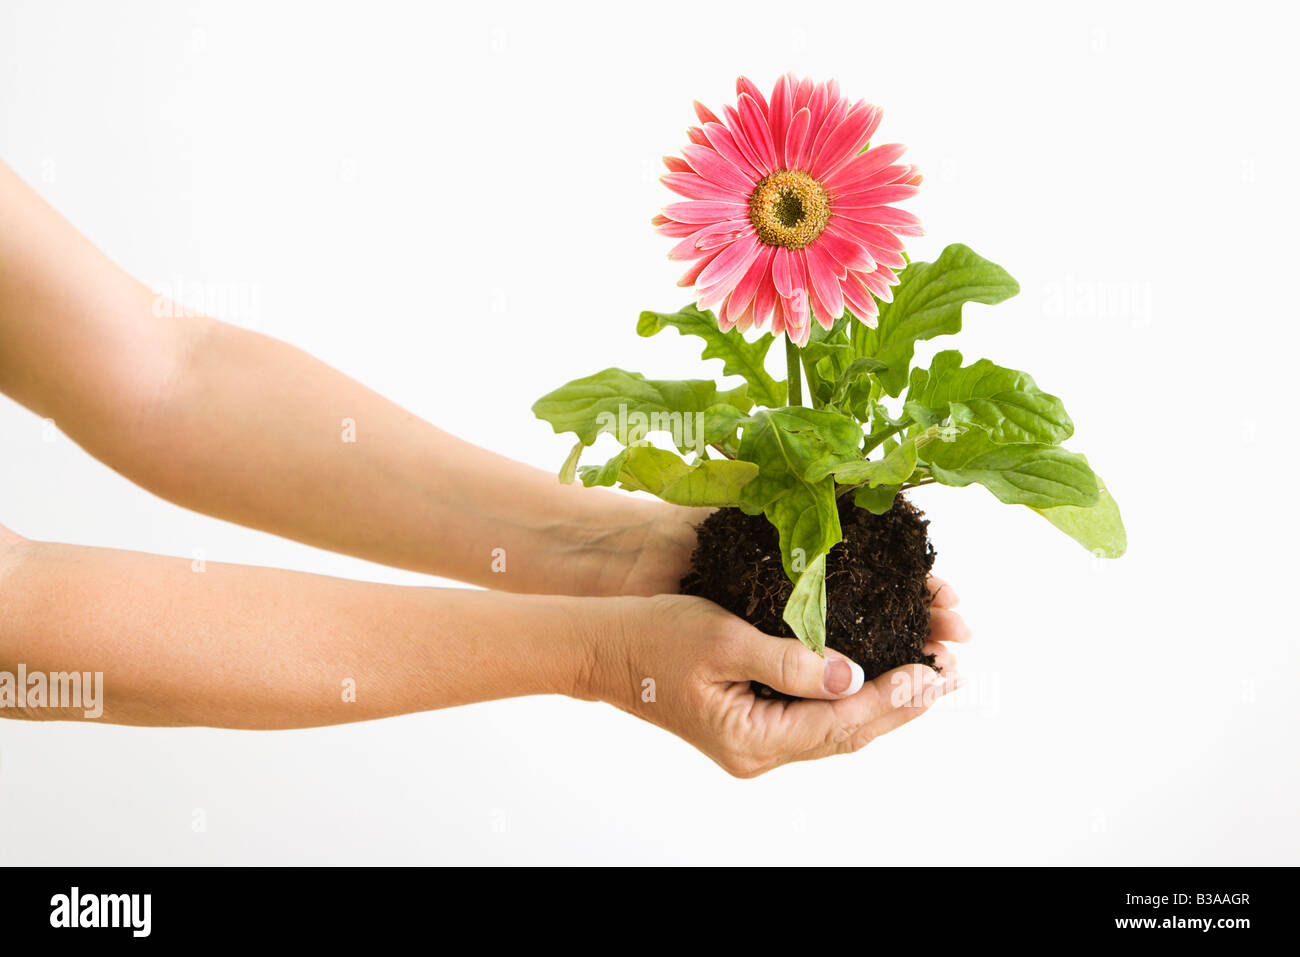 Femme s hand holding gerber daisy plant rose Banque D'Images